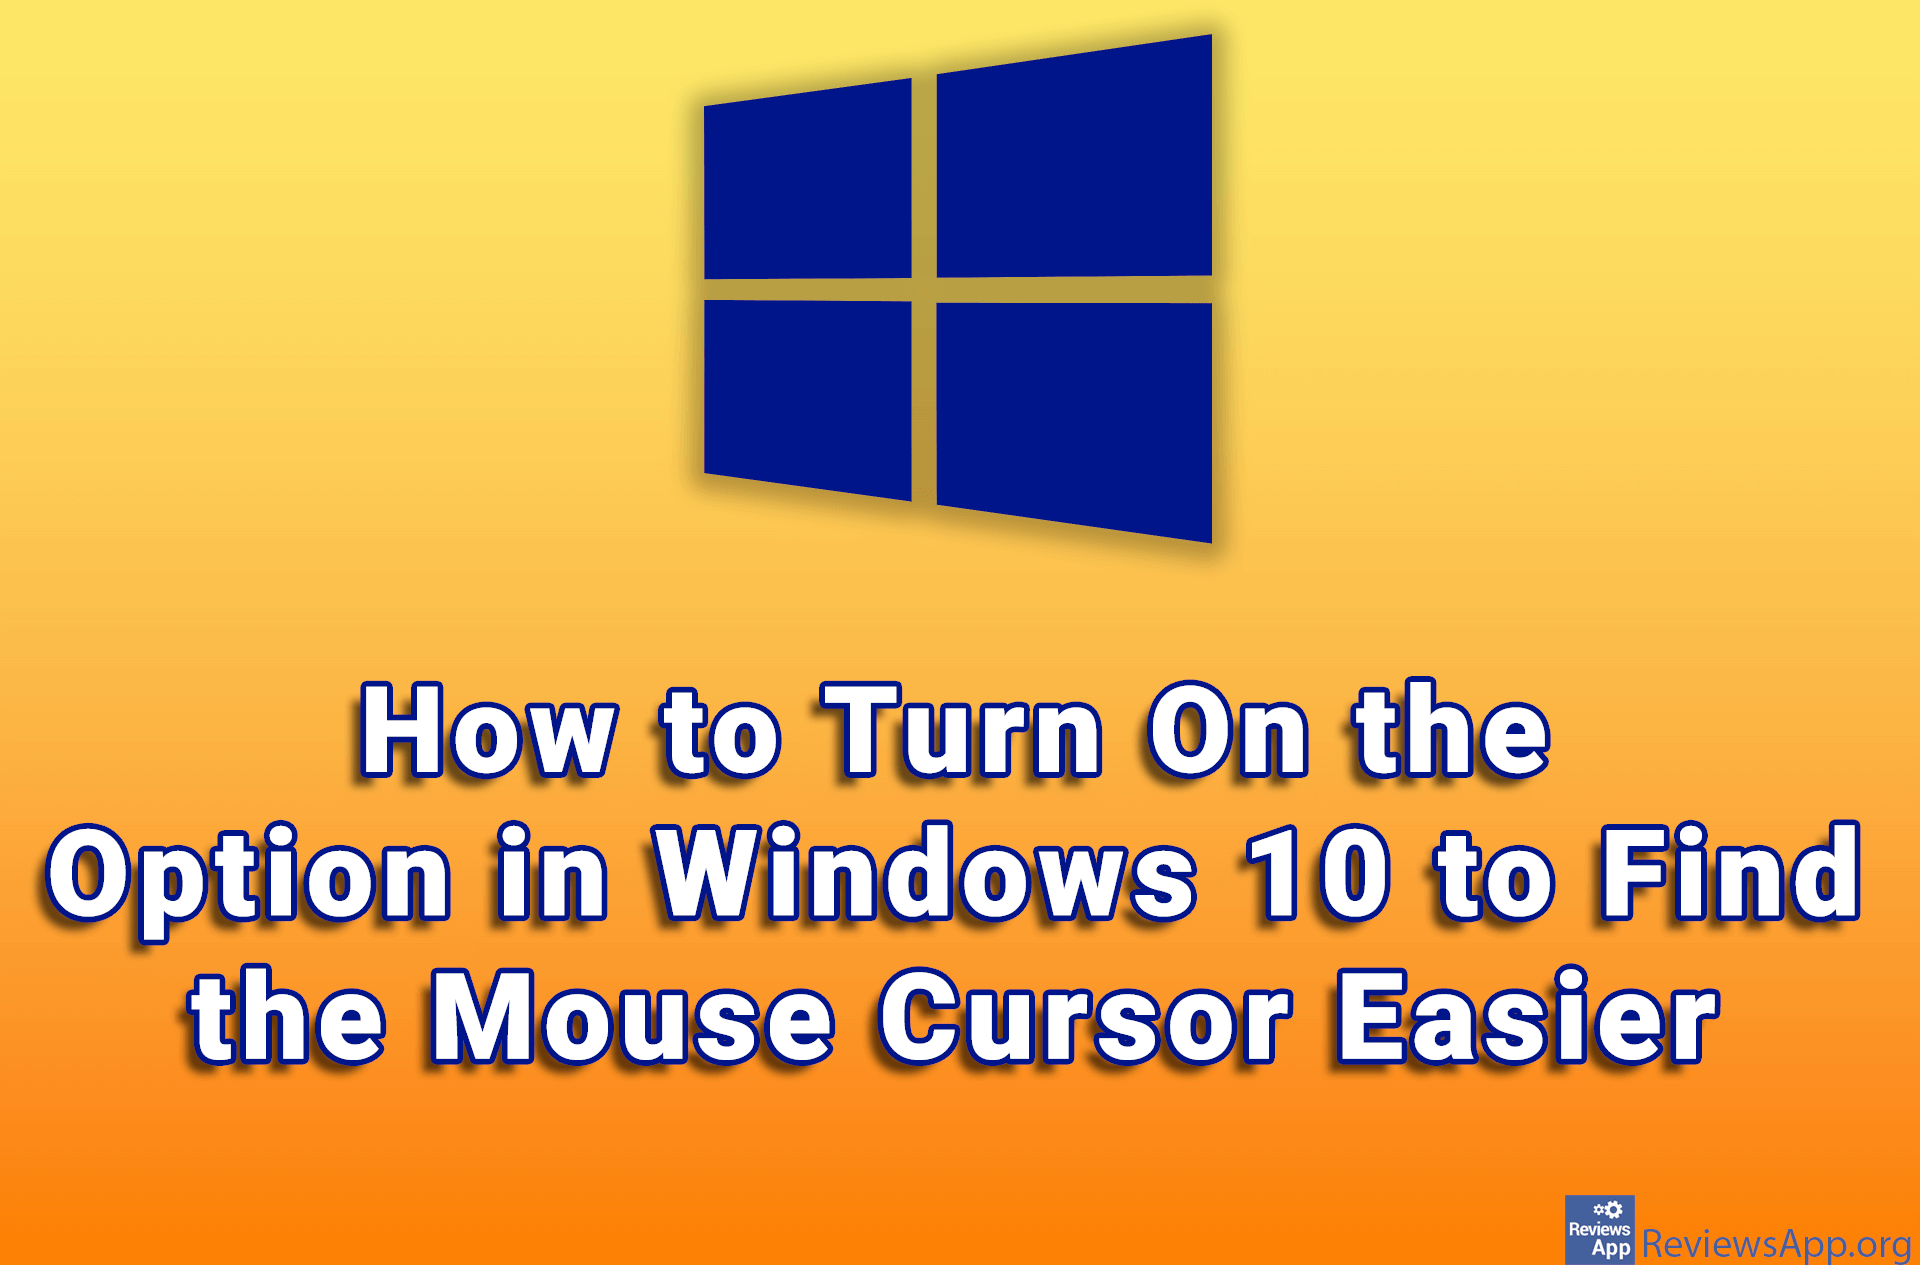 How to Turn On the Option in Windows 10 to Find the Mouse Cursor Easier